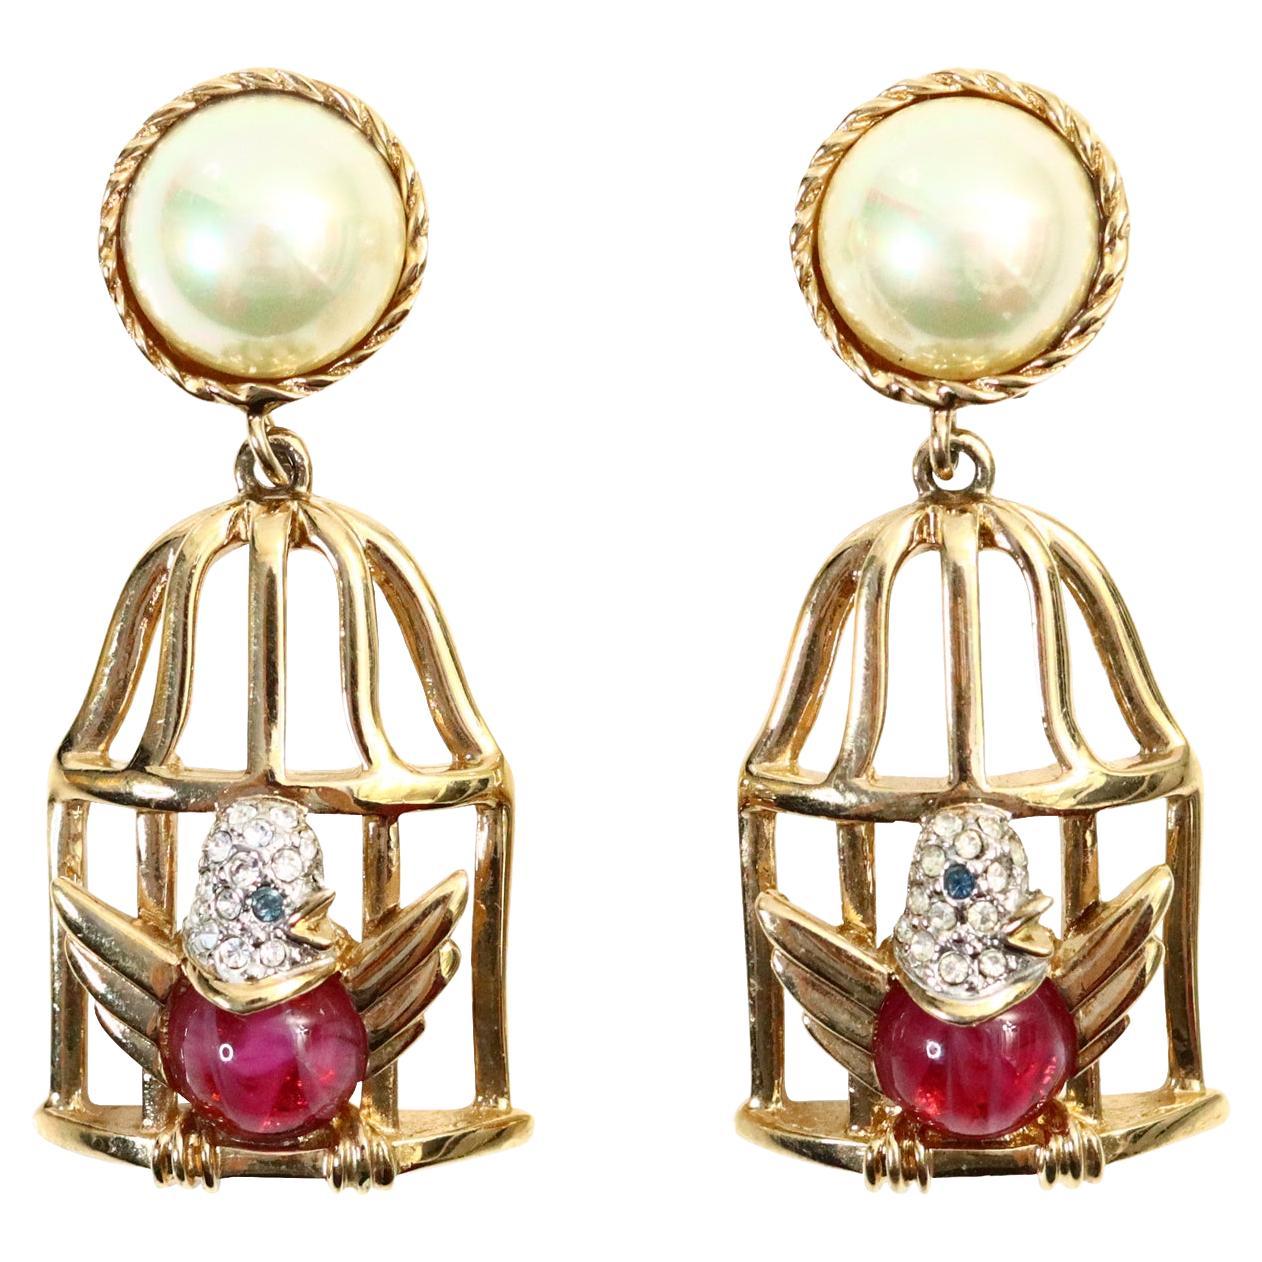 Vintage Carolee Gold and Faux Pearl Dangling Birdcage Earrings Circa 1980s